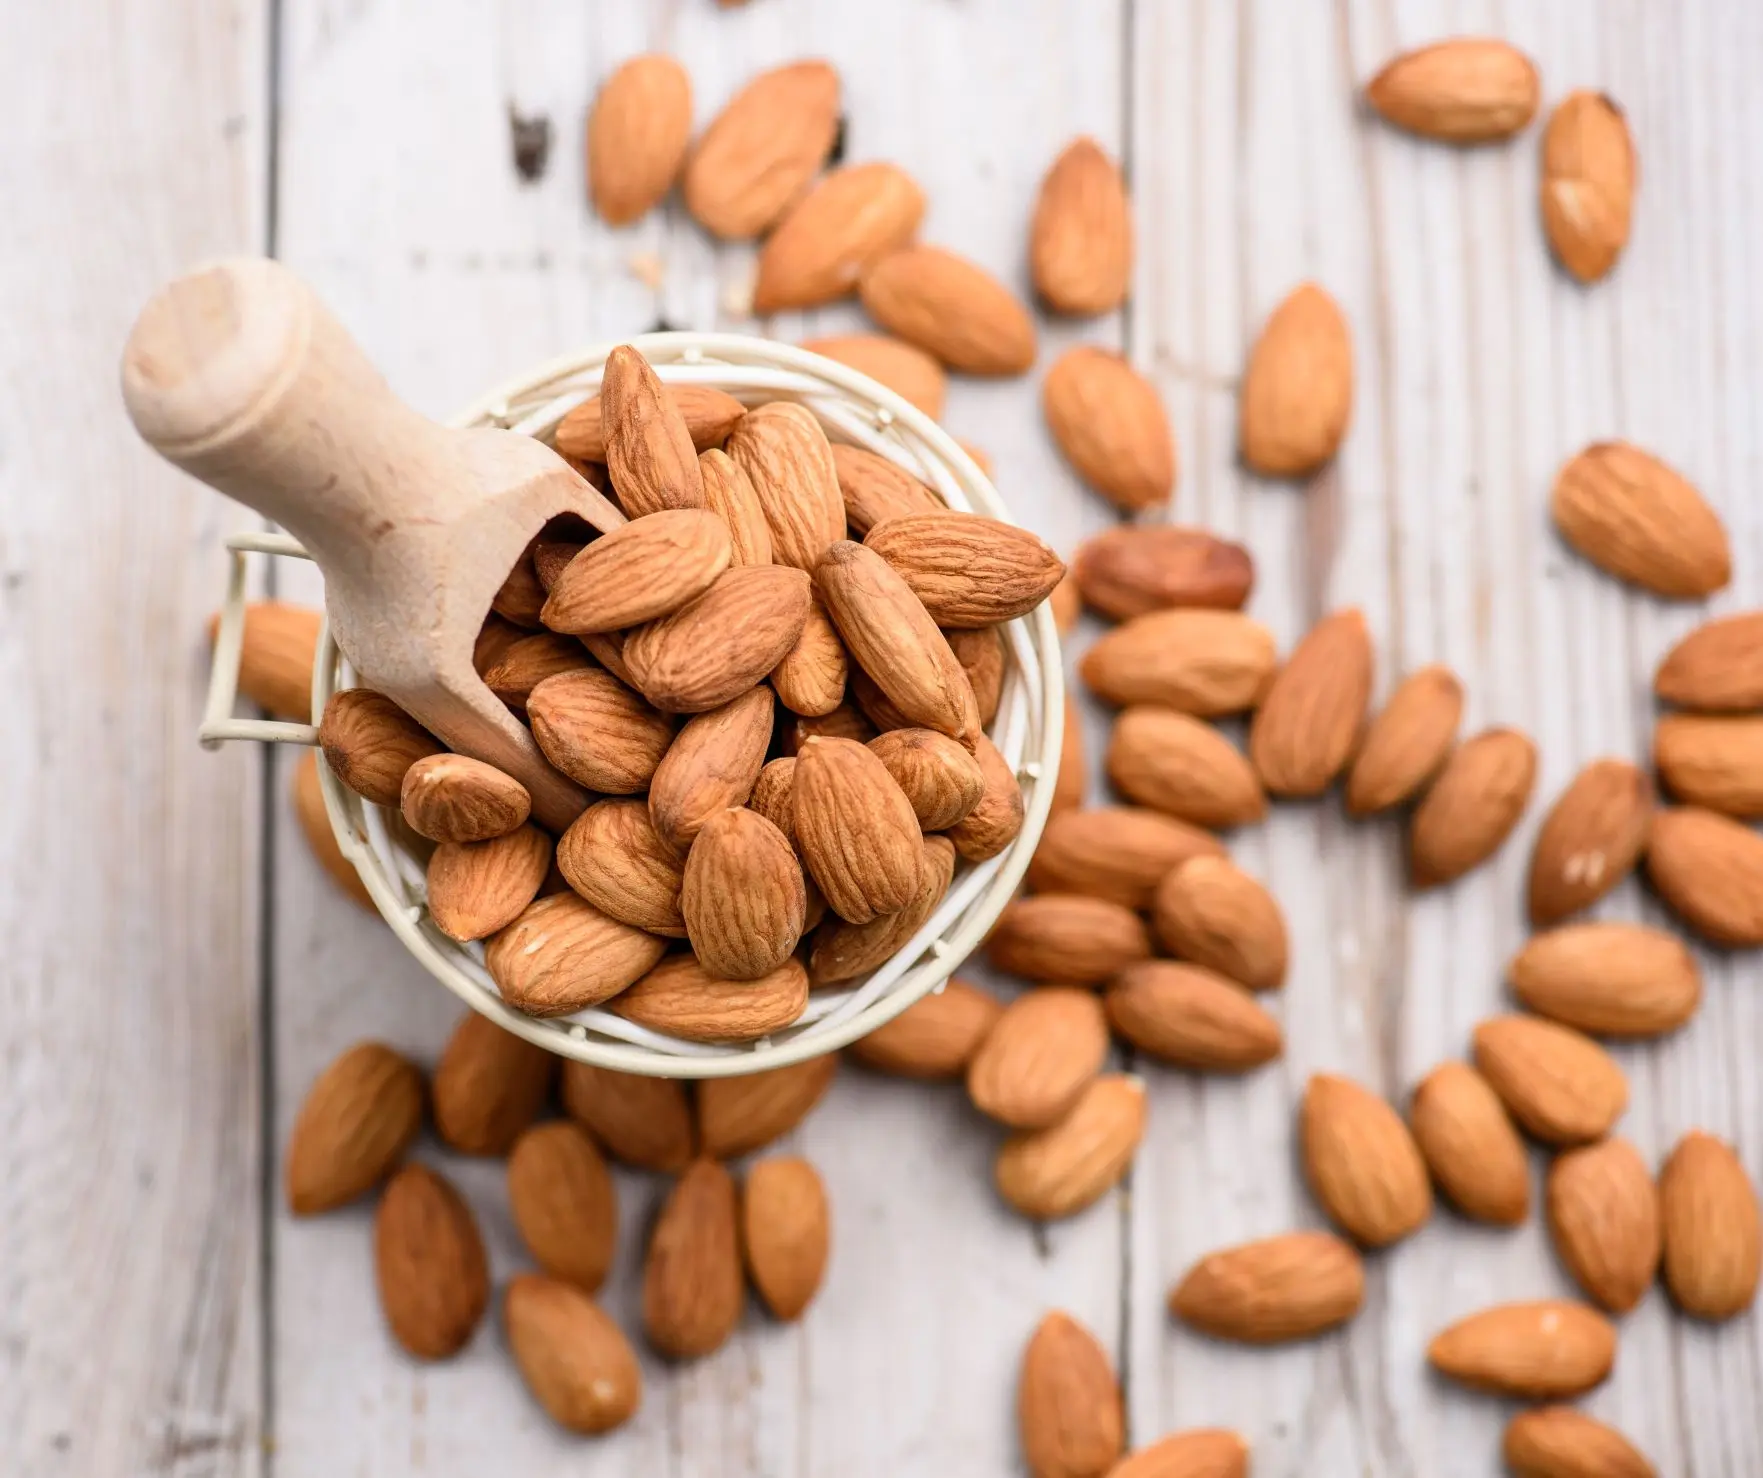 Almonds are rich in magnesium, promoting muscle relaxation and sleep.